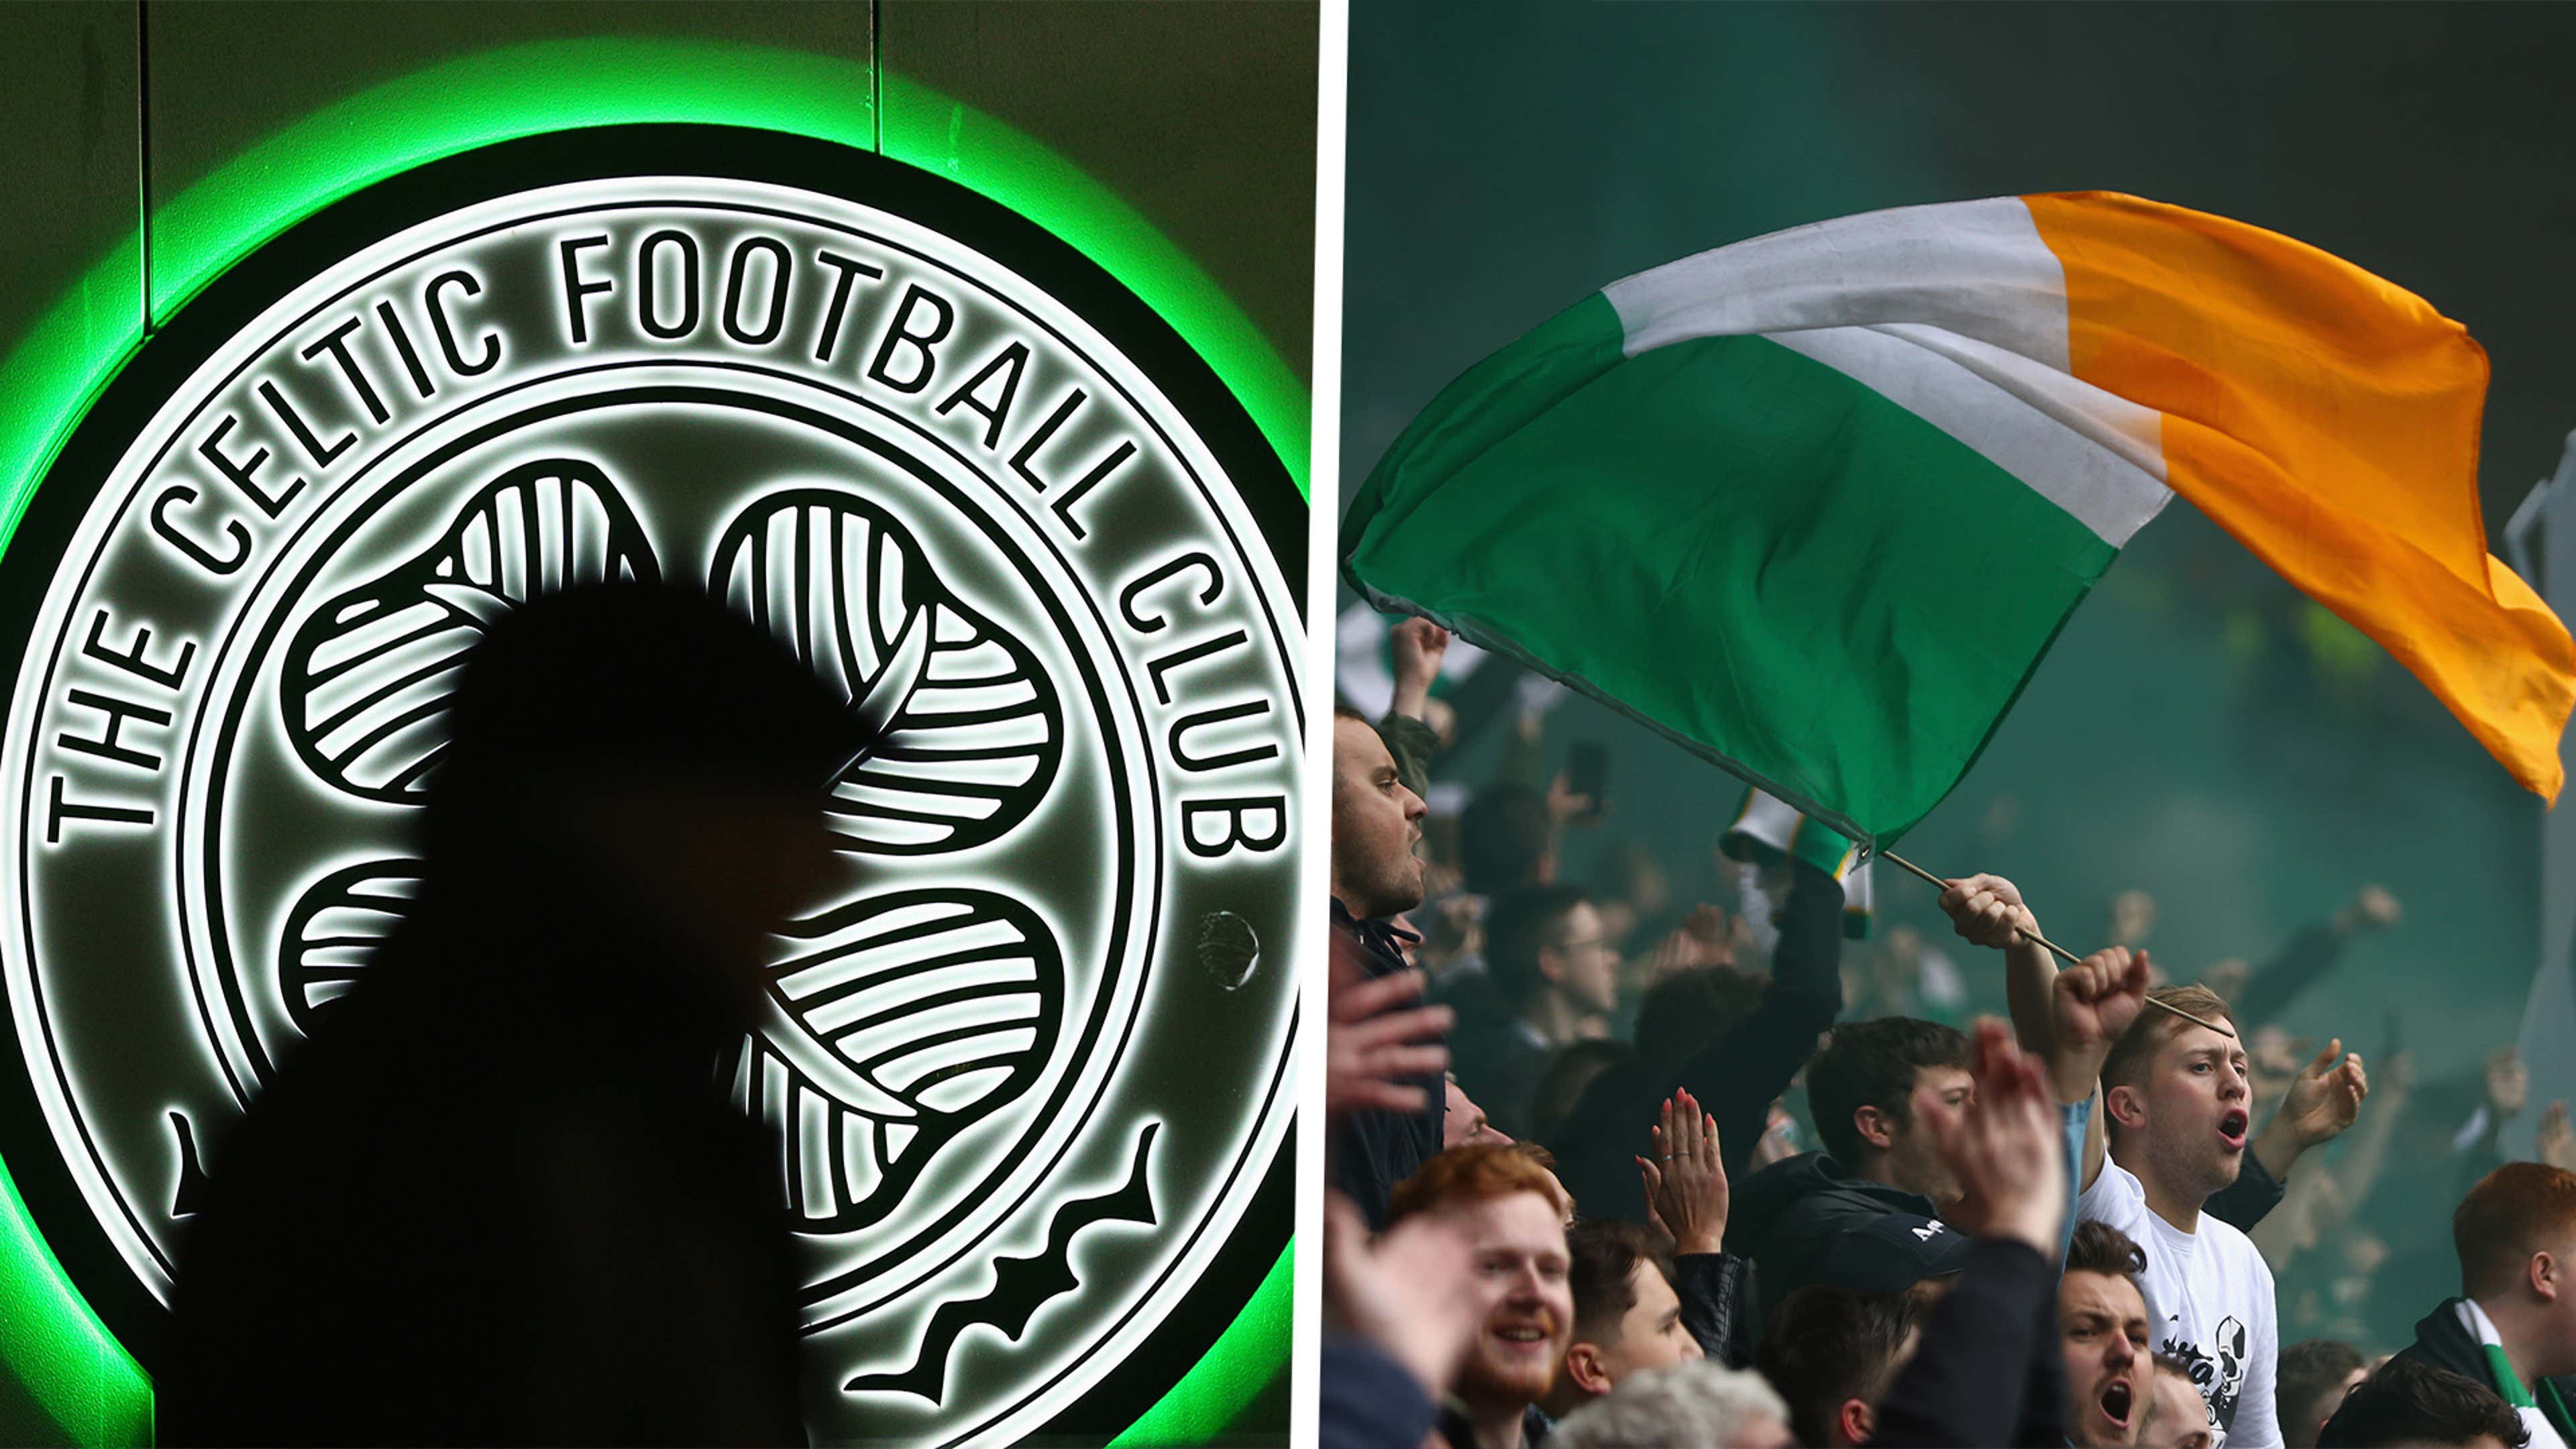 Celtic's Irish connection: Why Scottish club are associated with